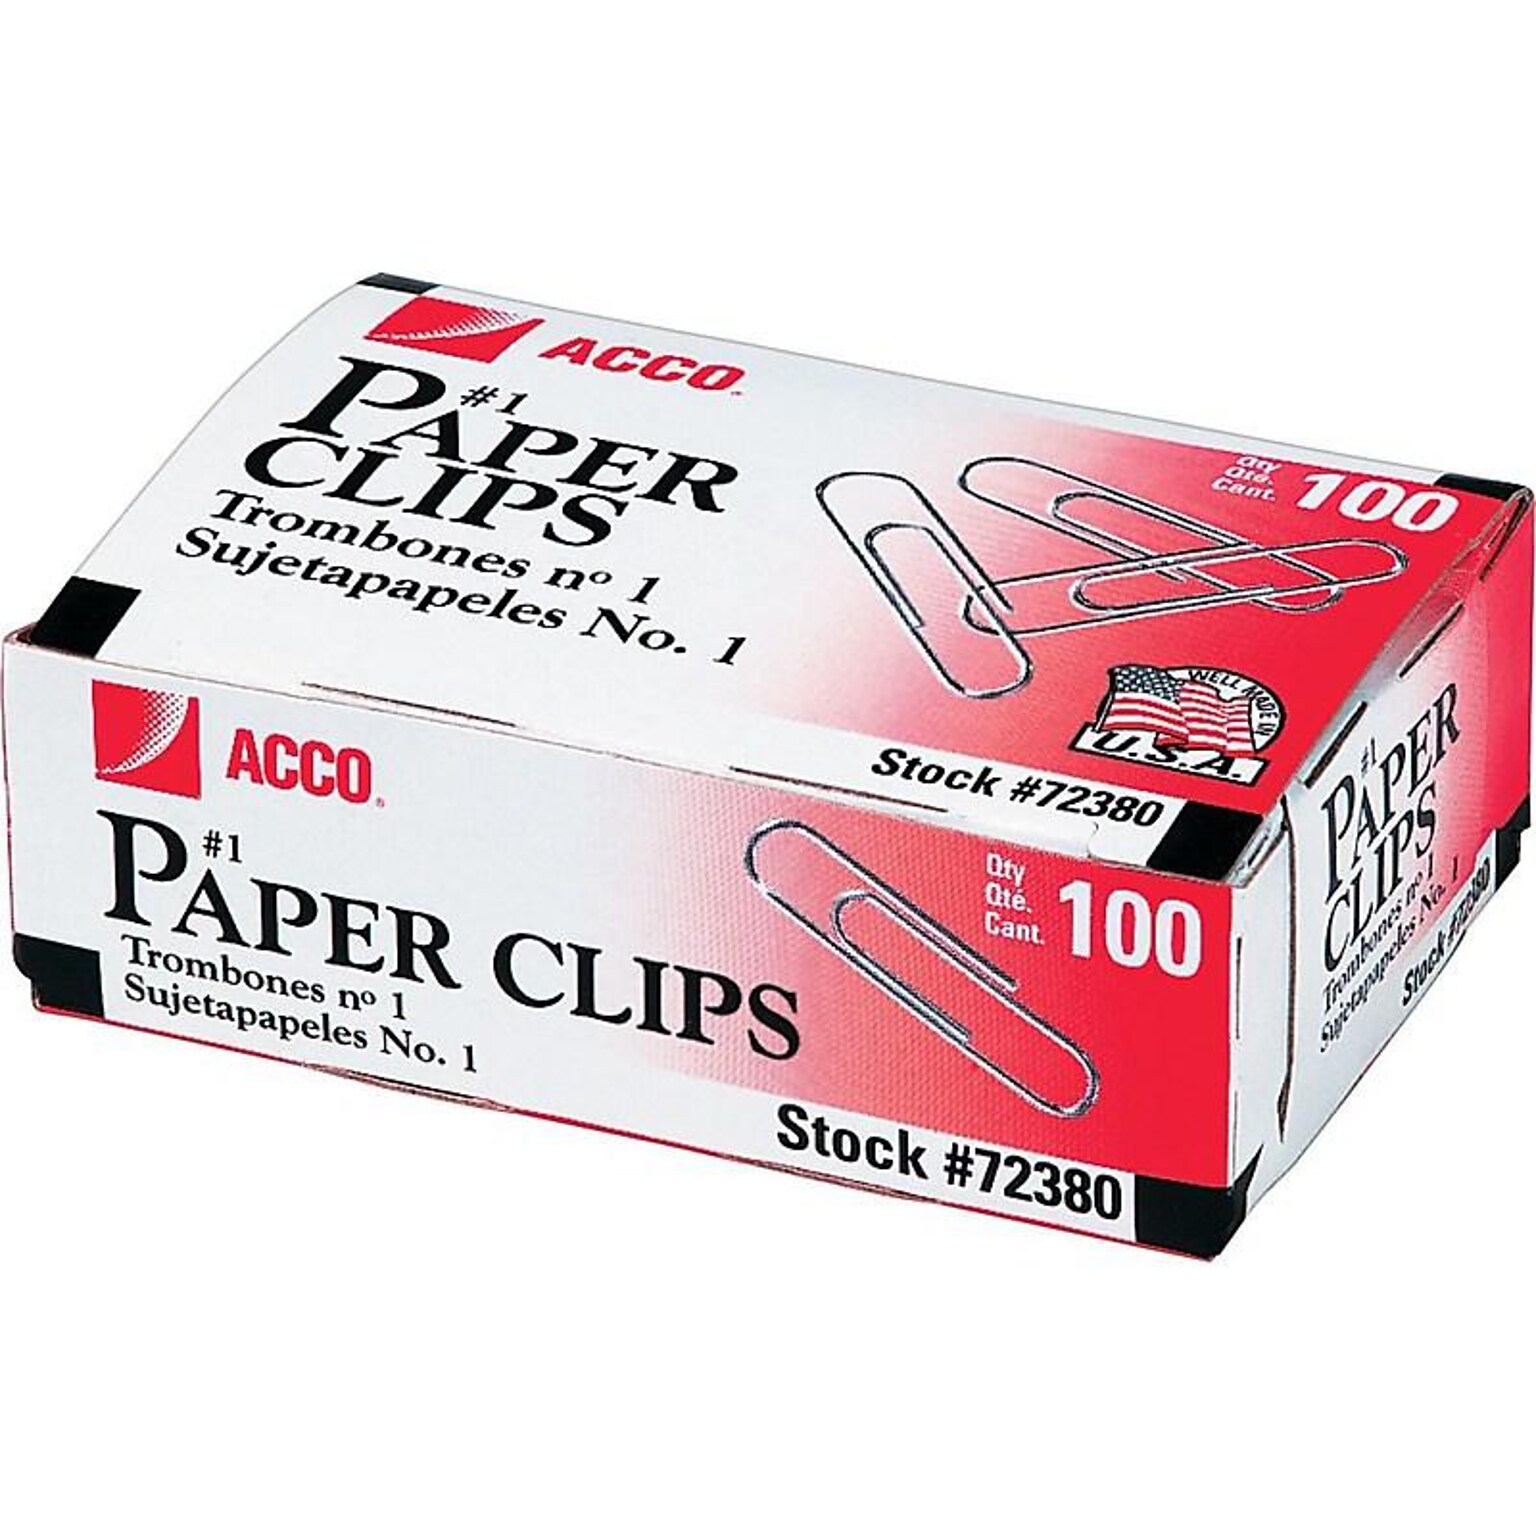 ACCO Economy #1 Paper Clips, Silver, 100/Box, 10 Boxes/Pack (A7072380)